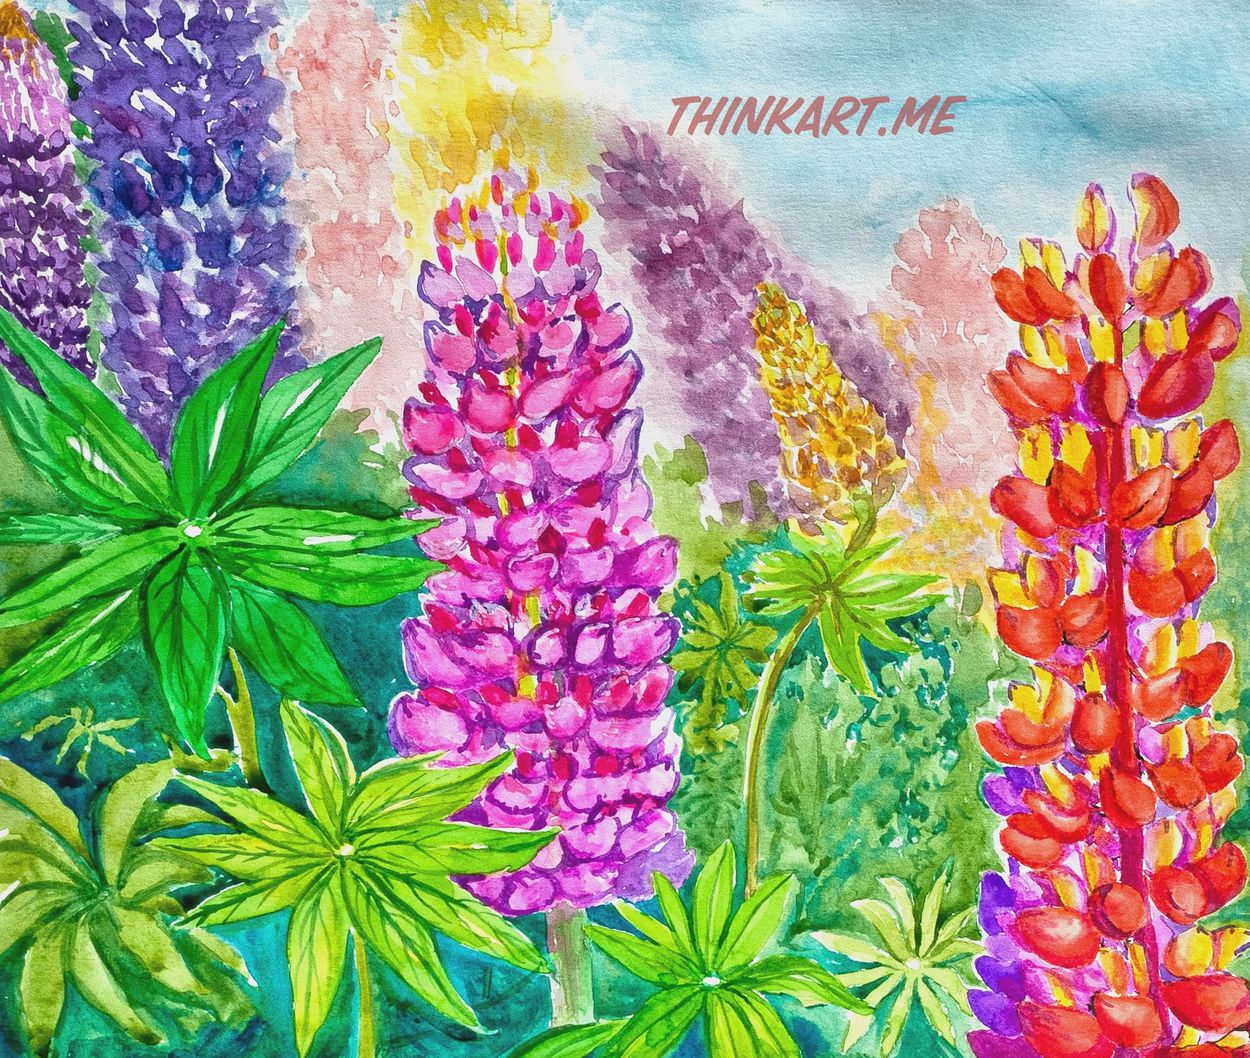 Colorful Lupins 
Code - #2304
Dimension - 12”x10”
Material - Canson Mixed media Paper